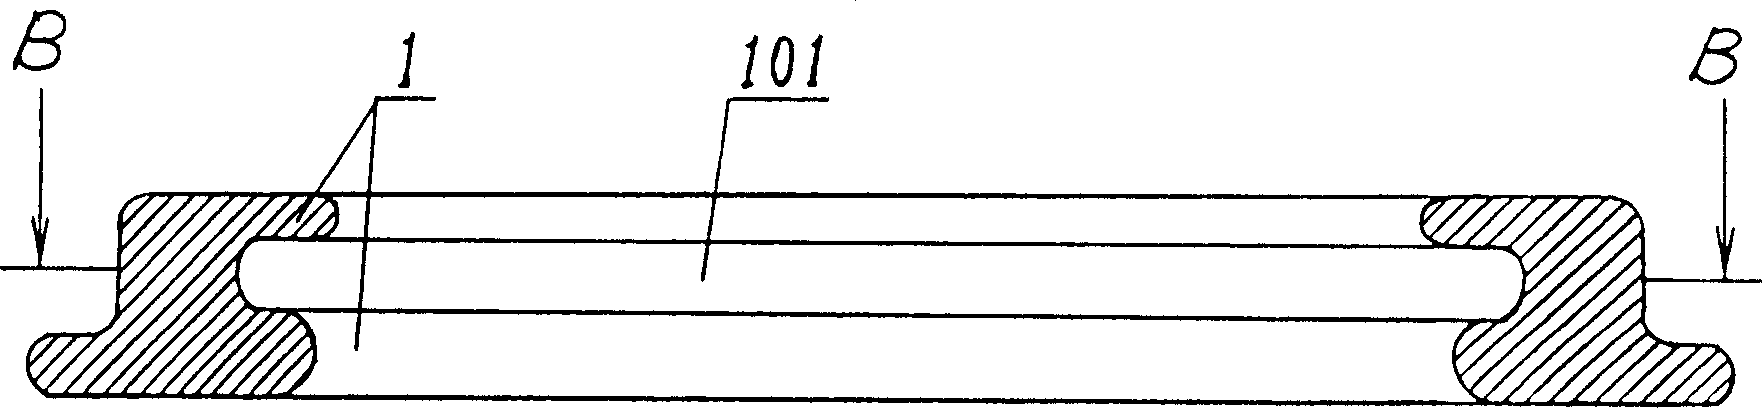 Method for twisting yarn using yarn twister without traveller